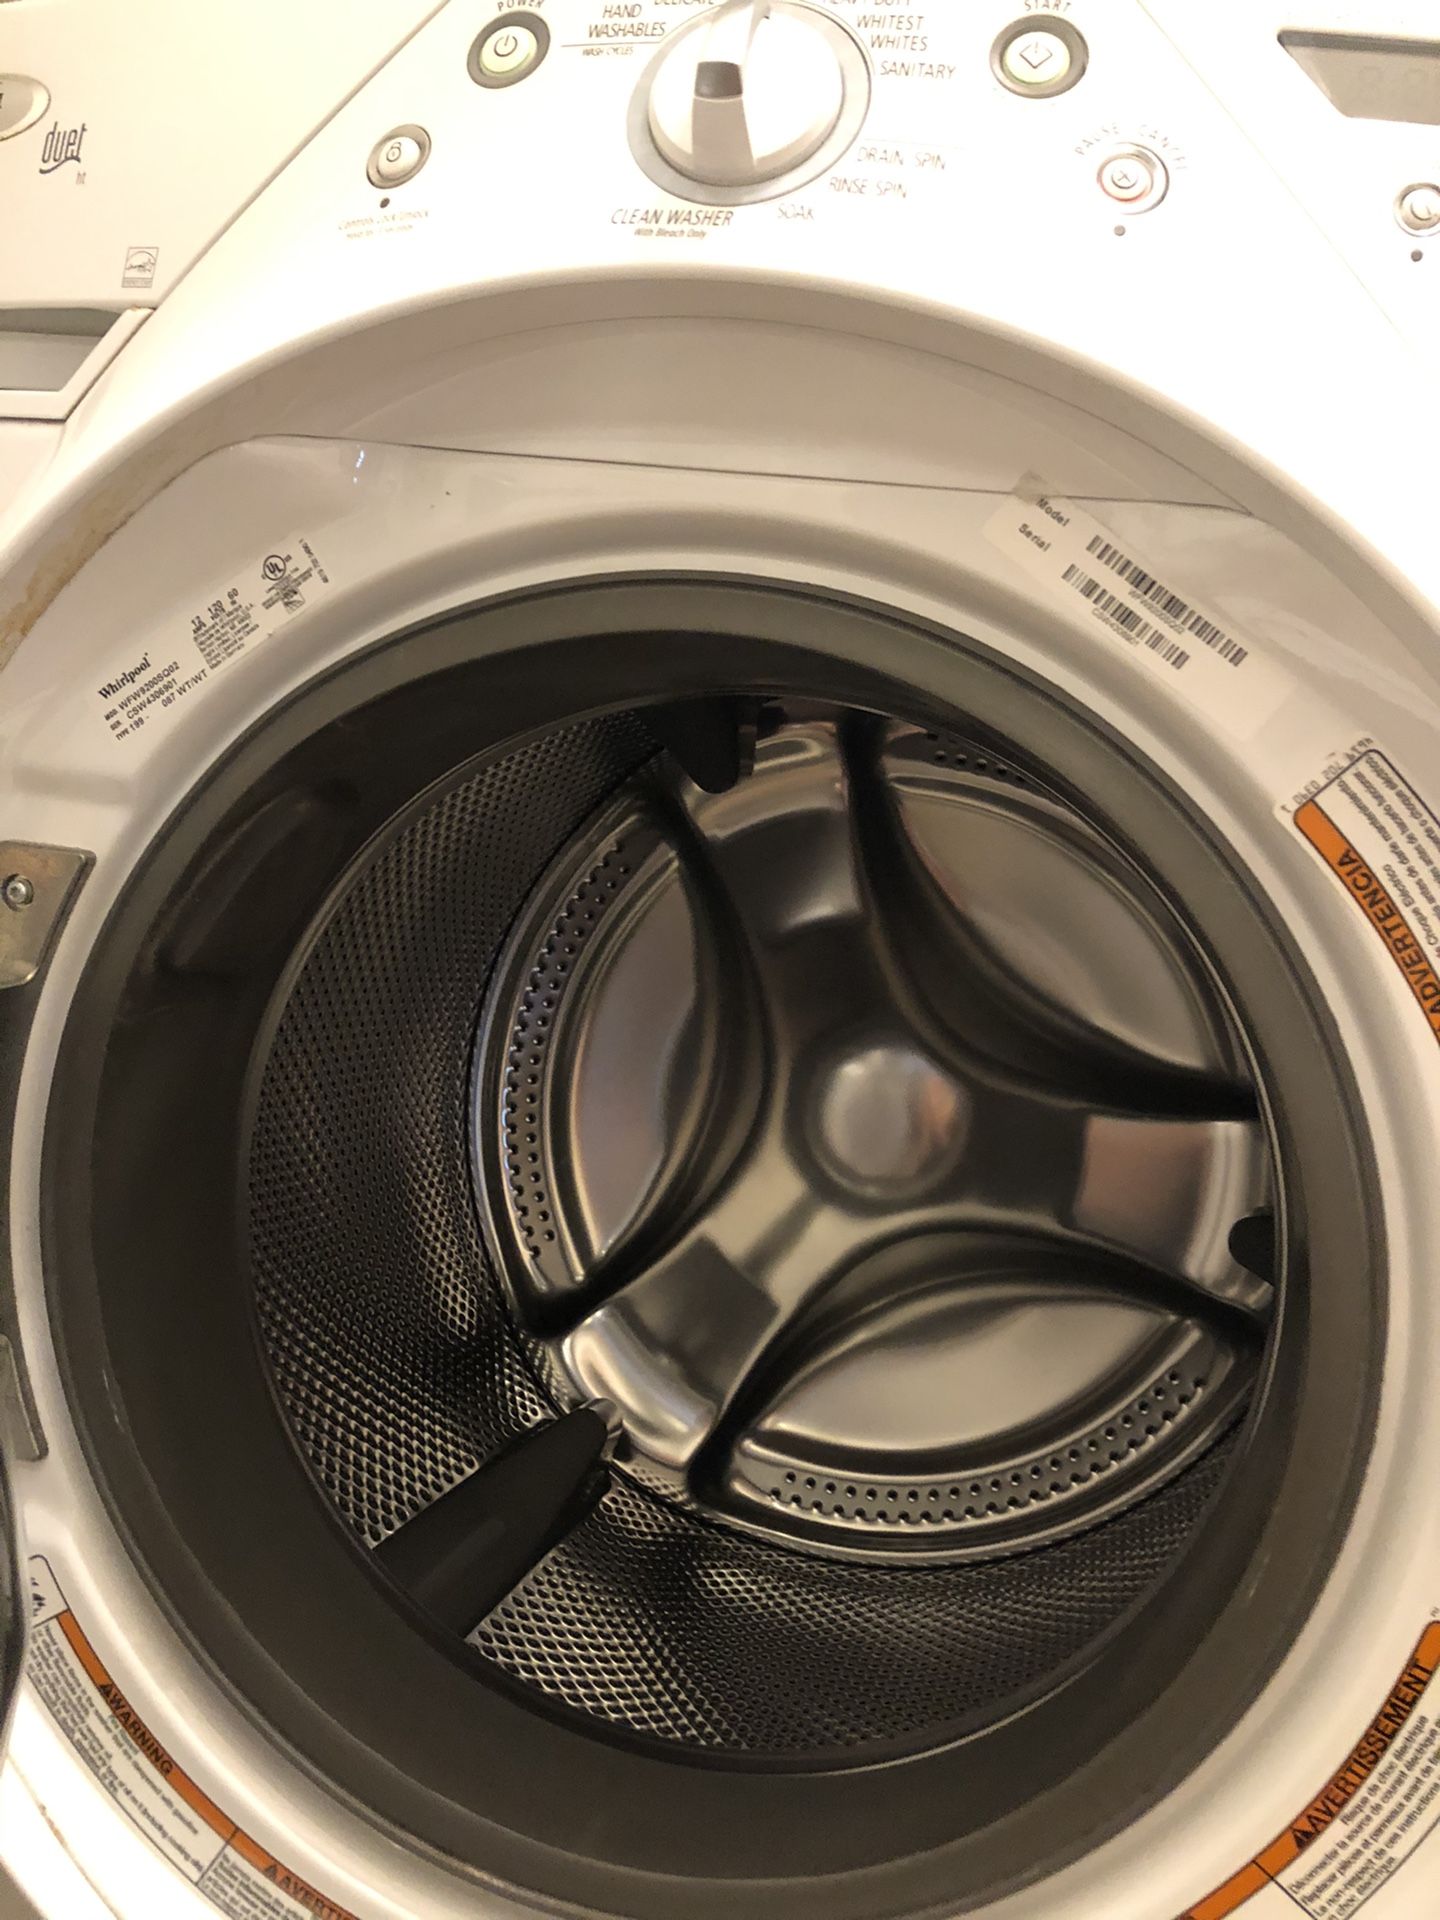 Whirlpool Duet Front Loading Washer